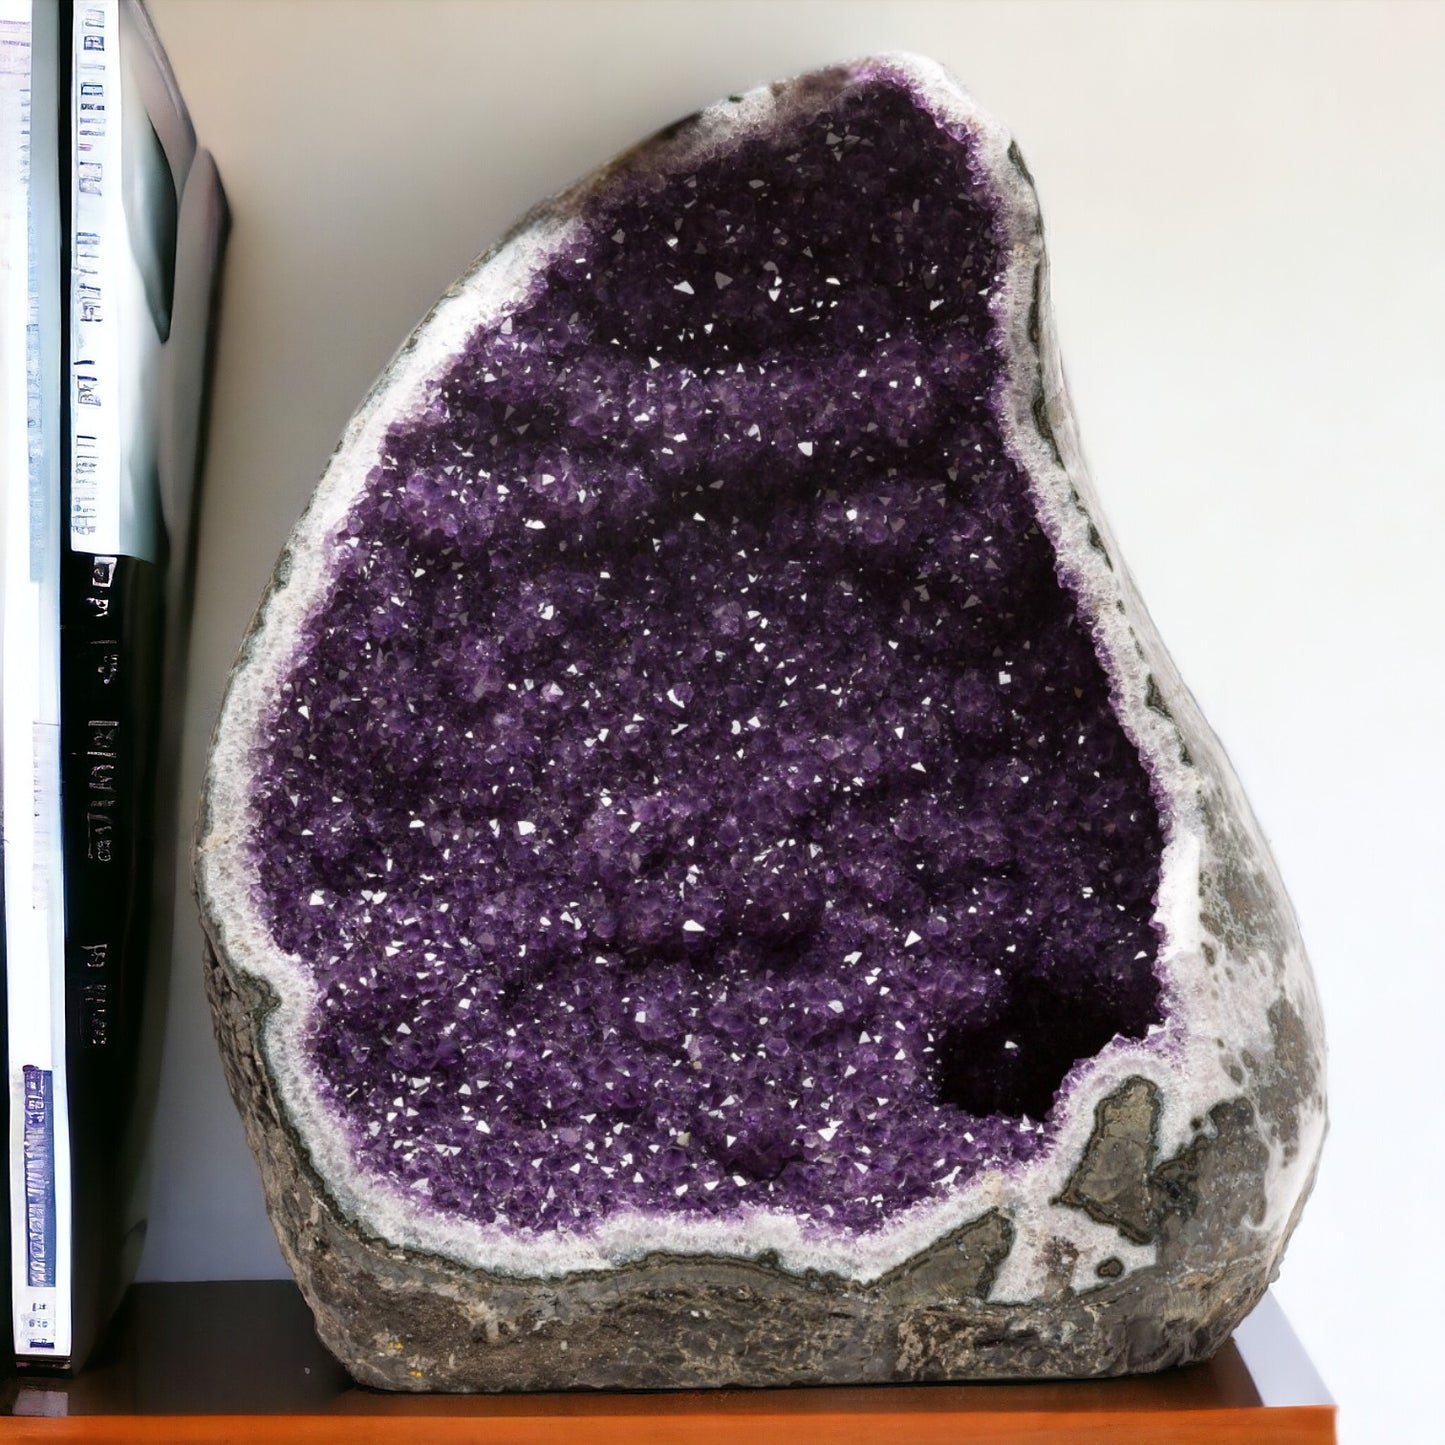 71.85 lbs Unique Collectors Quality Amethyst Geode - Large Natural Deep Purple Crystal Cluster Stone from Uruguay